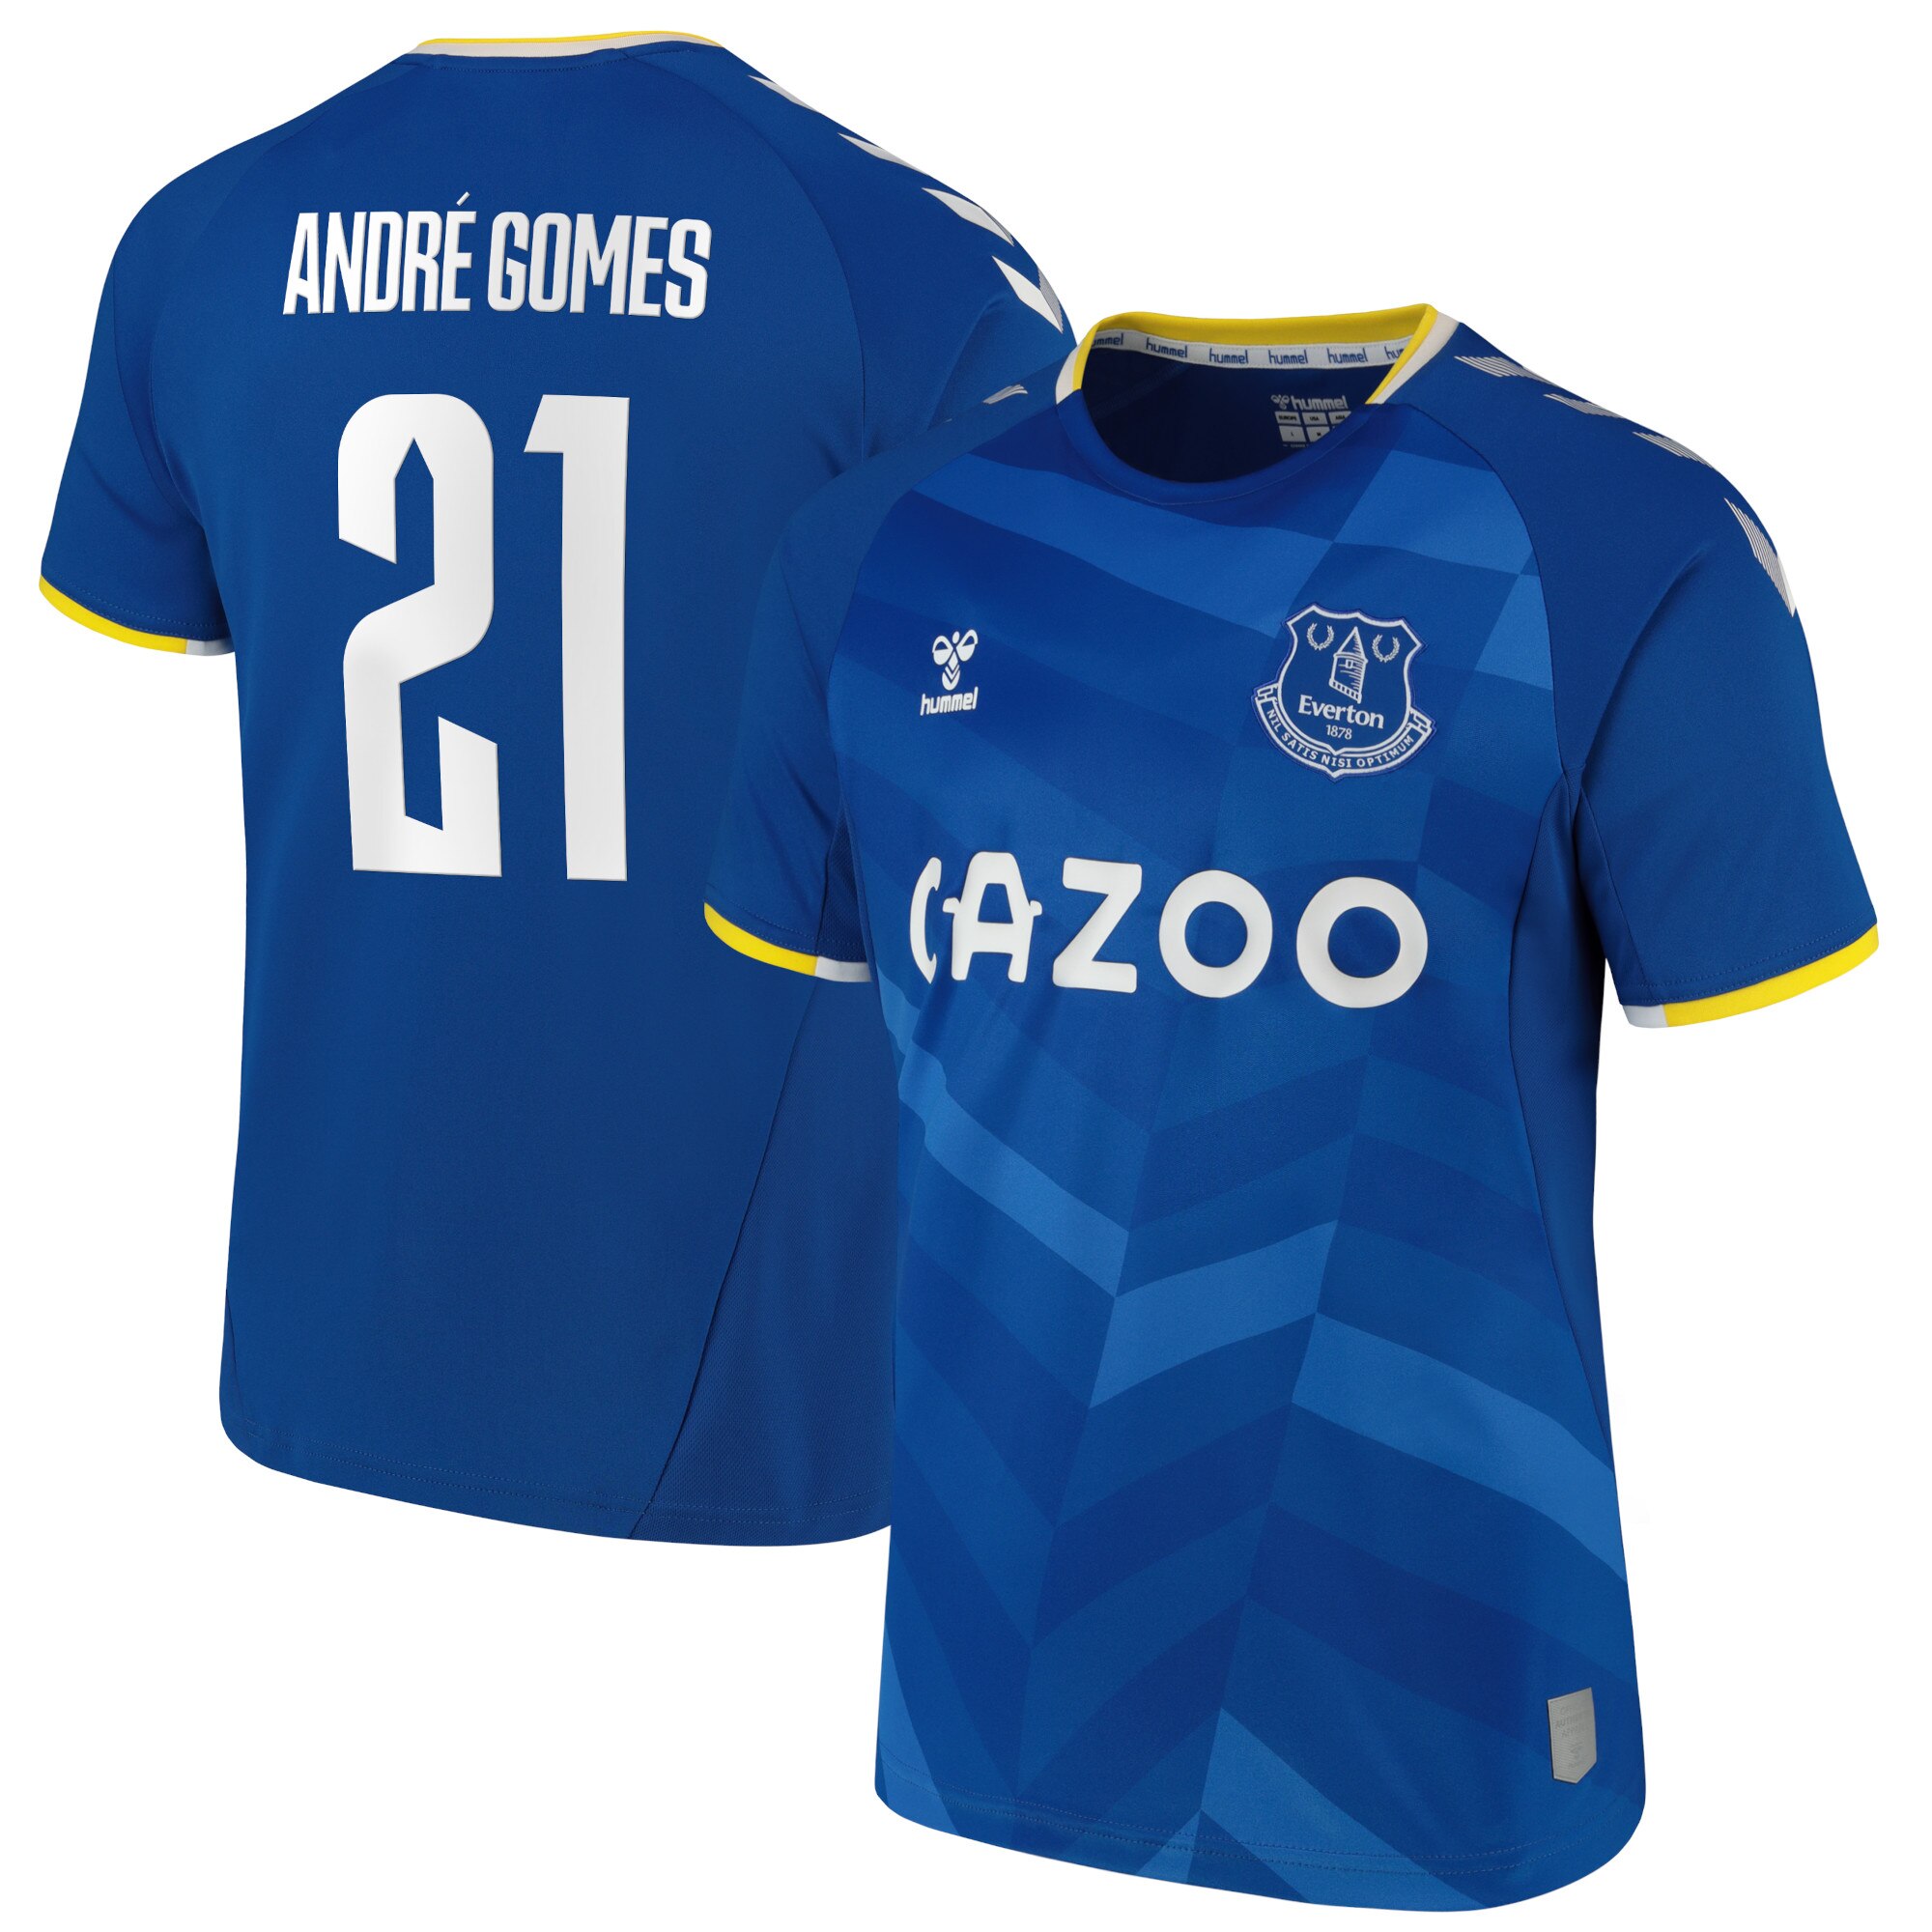 Everton Cup Home Shirt - 2021-22 with André Gomes 21 printing